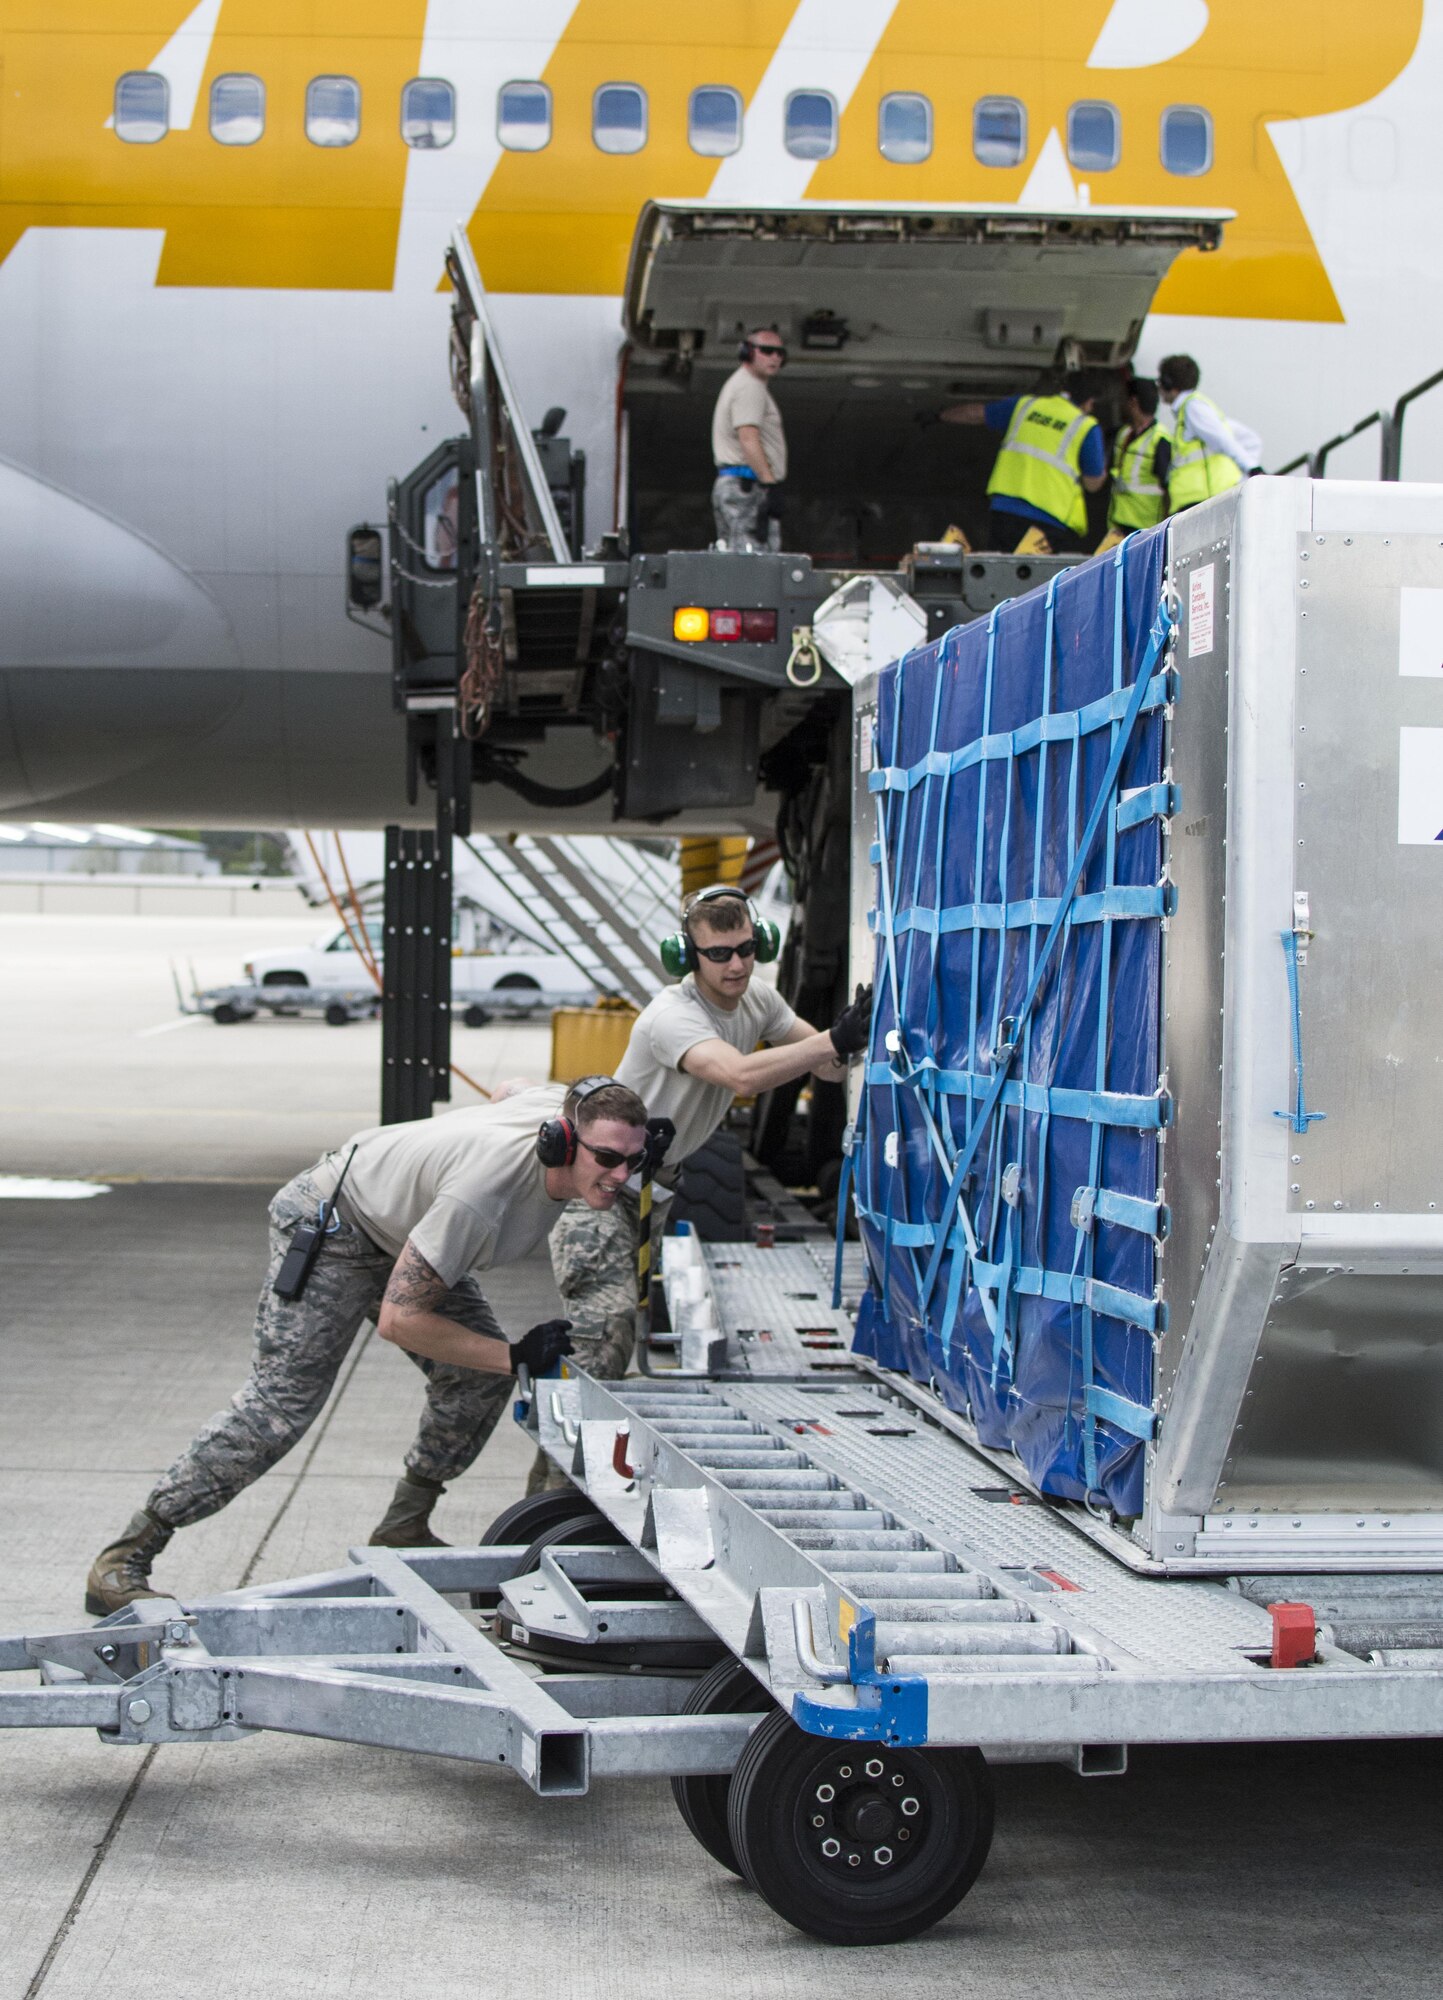 Airman 1st Class Patrick J. Lokhaiser (right), an air transportation specialist with the 32nd Aerial Port Squadron from Pittsburgh, and active-duty counterpart Senior Airman Scott Marvin, an air transportation specialist with the 721st APS here, unload a luggage pod on the flight line Ramstein Air Base, Germany, May 6, 2015. (U.S. Air Force photo by Staff Sgt. Brandy Grace)
